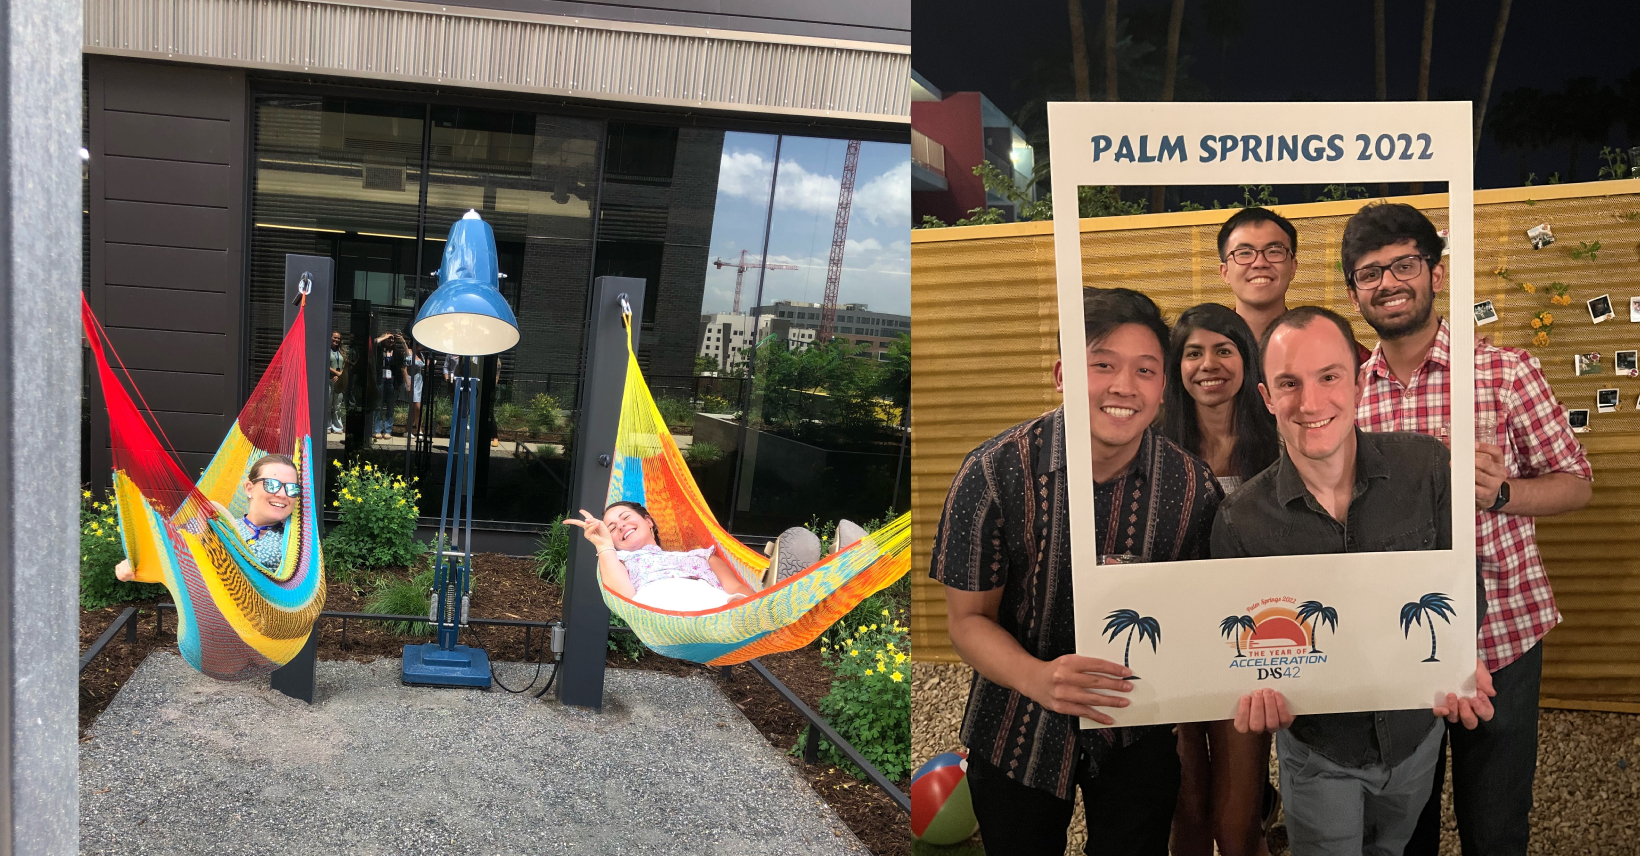 Right: DAS42 team member relax in brightly colored hammocks outside the office. Left: DAS42 team members celebrate while holding a frame that reads "Palm Springs 2022"